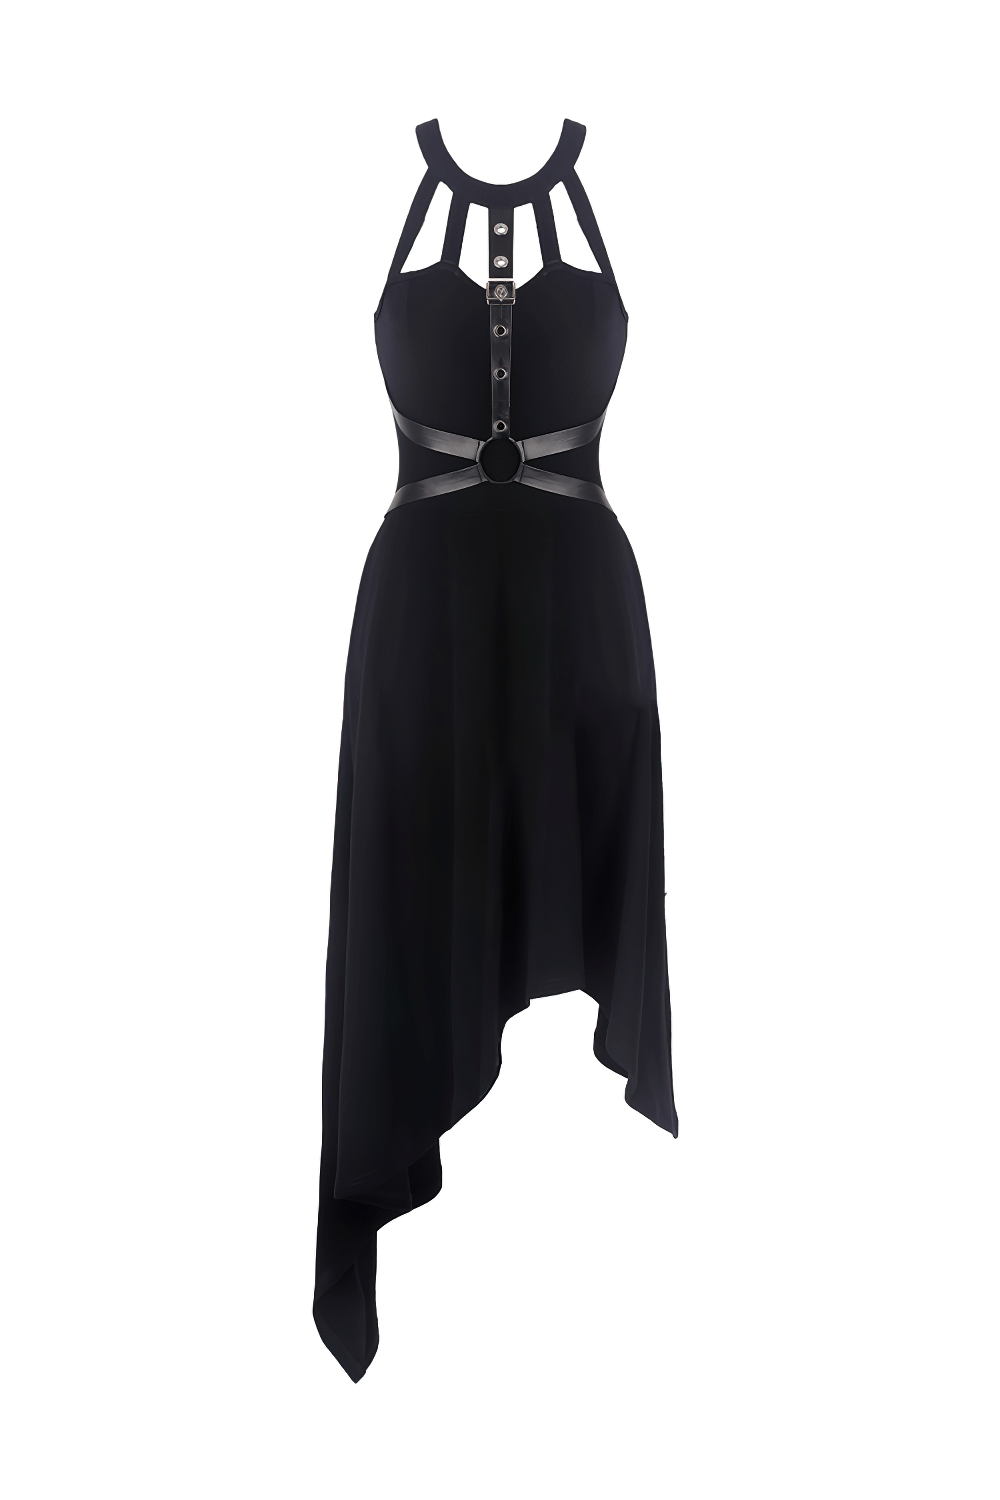 Gothic Female Dress with Metal Accents and Asymmetric Hem